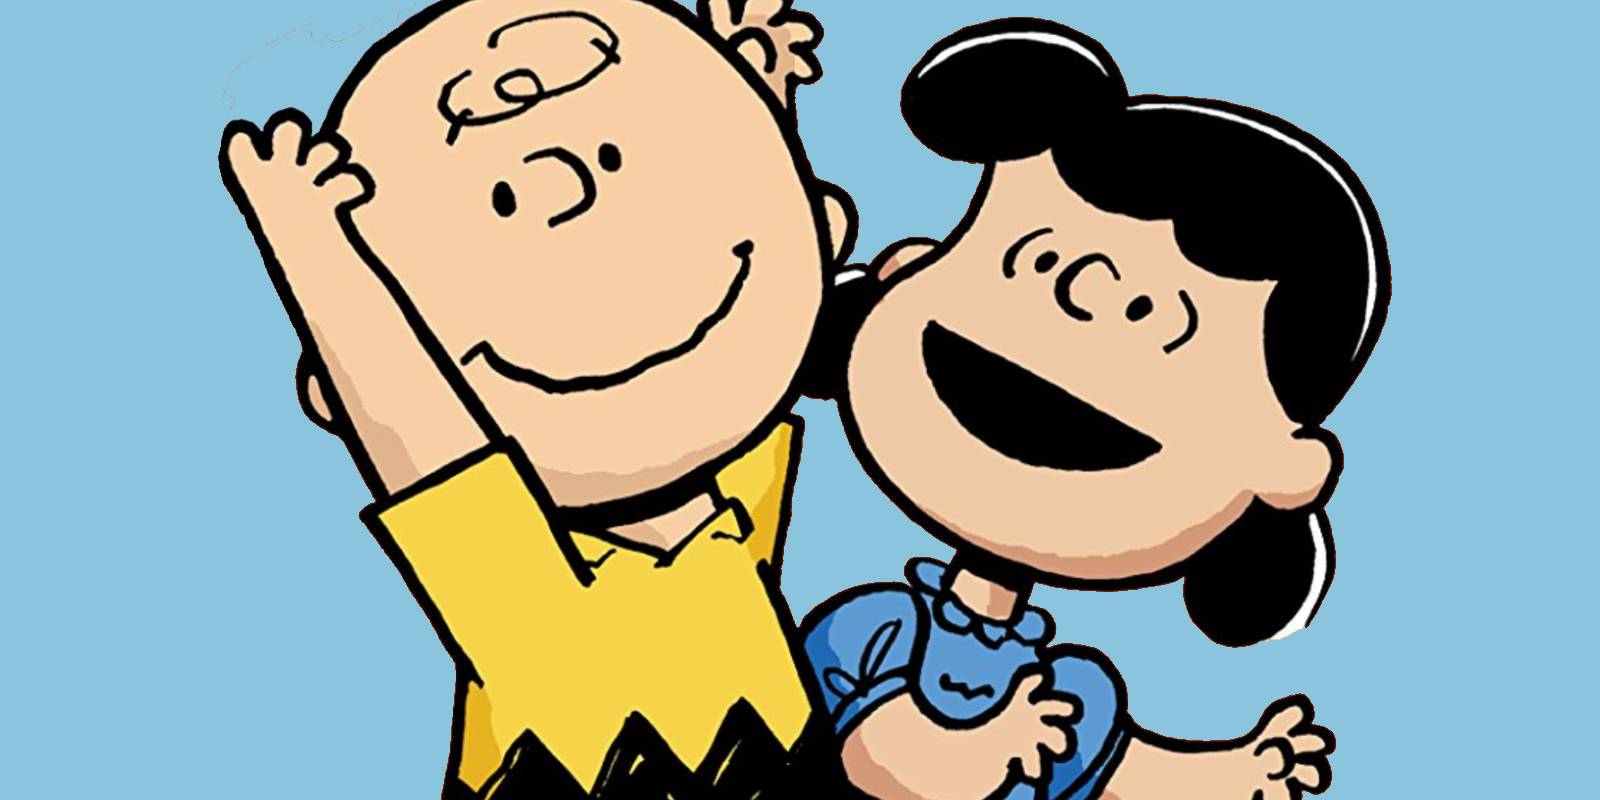 Charlie brown x lucy